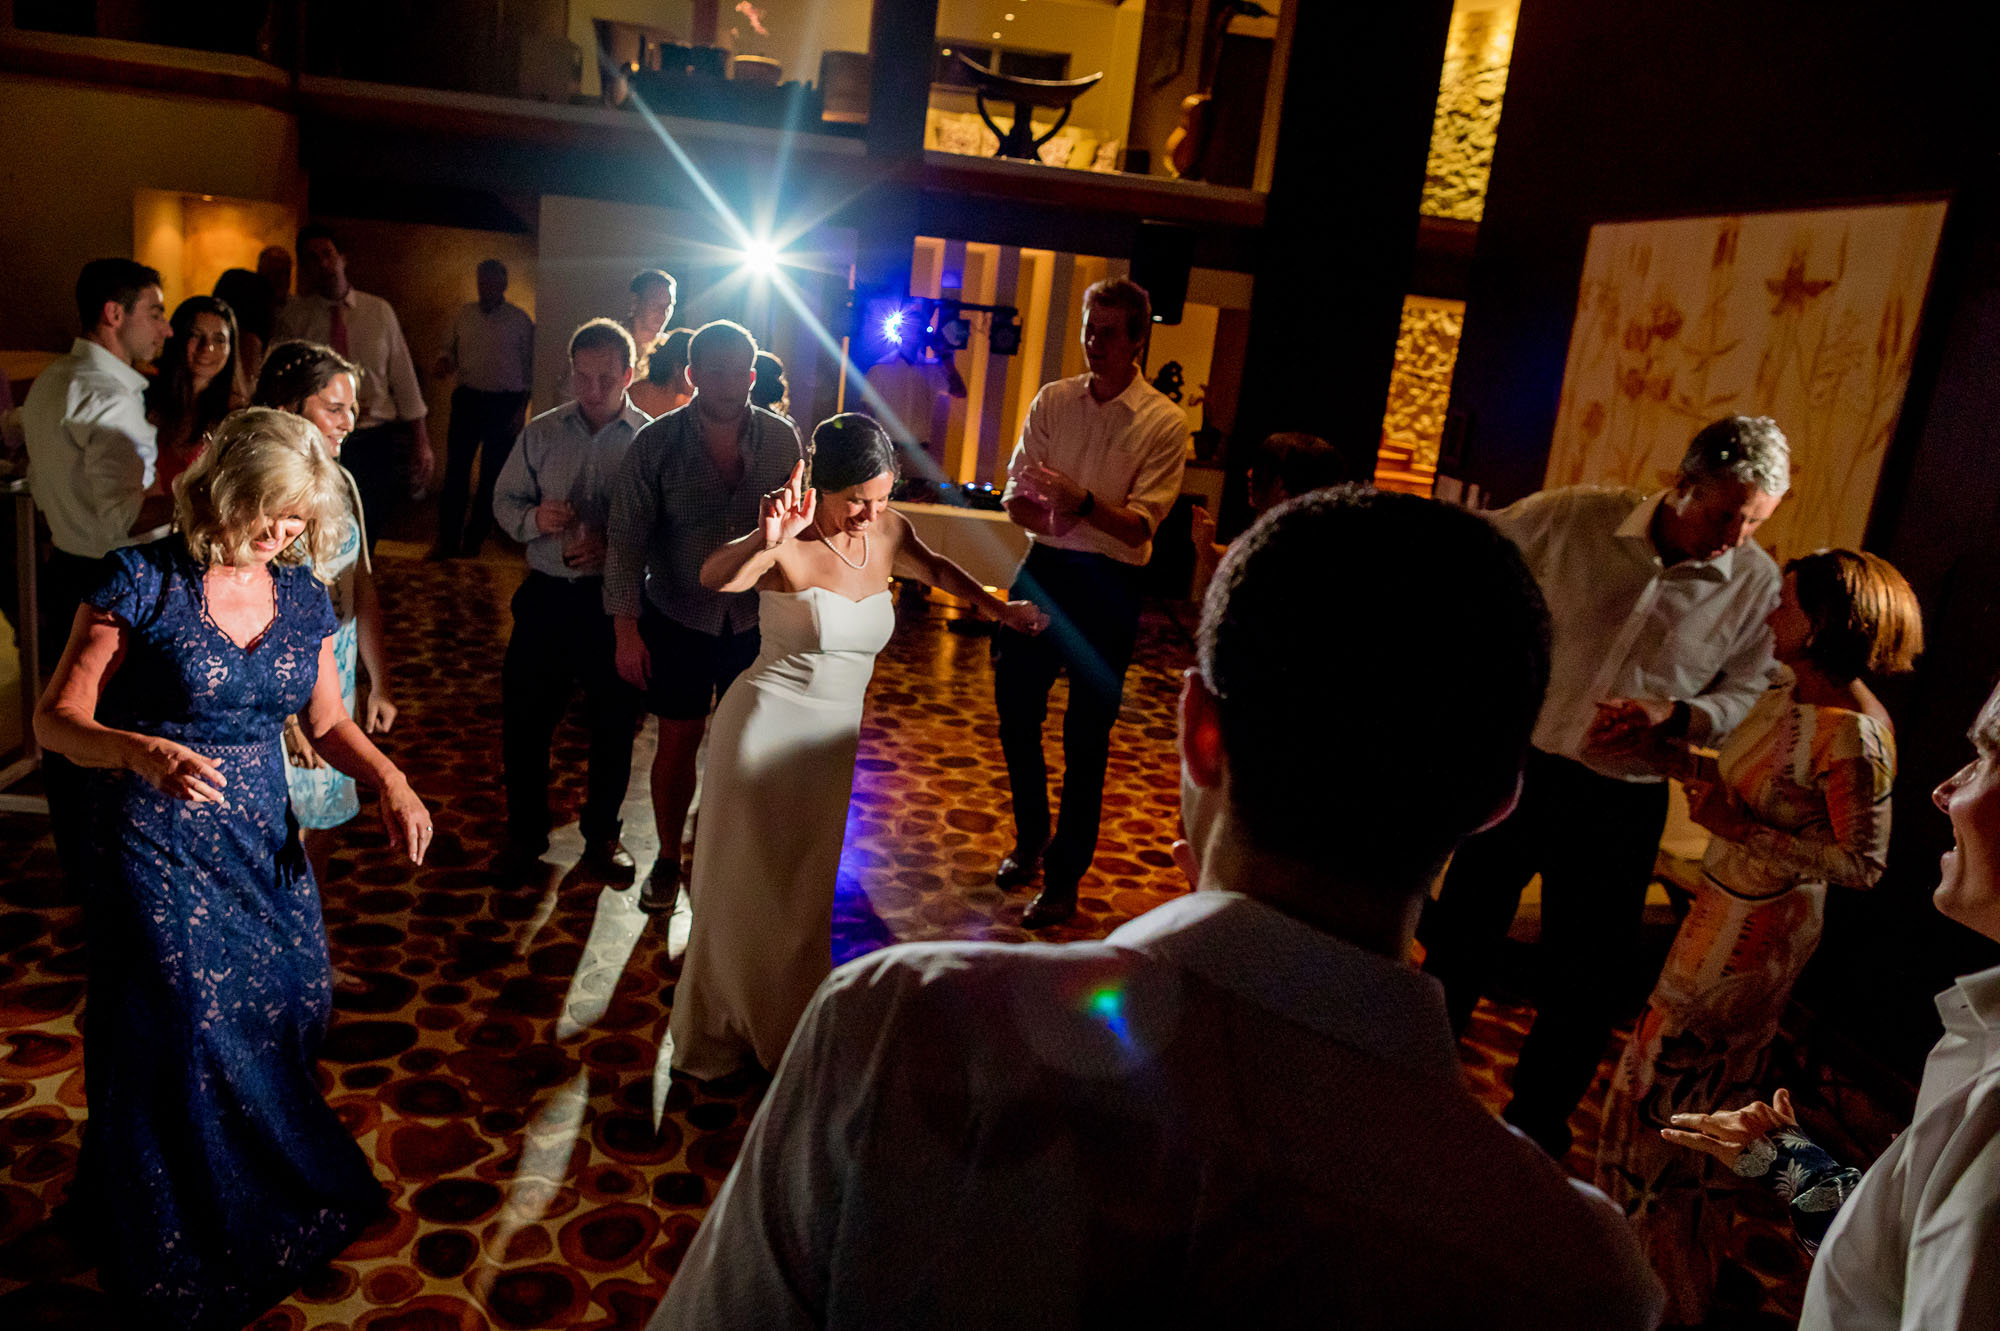 Getting married in a private villa means dancing the night away